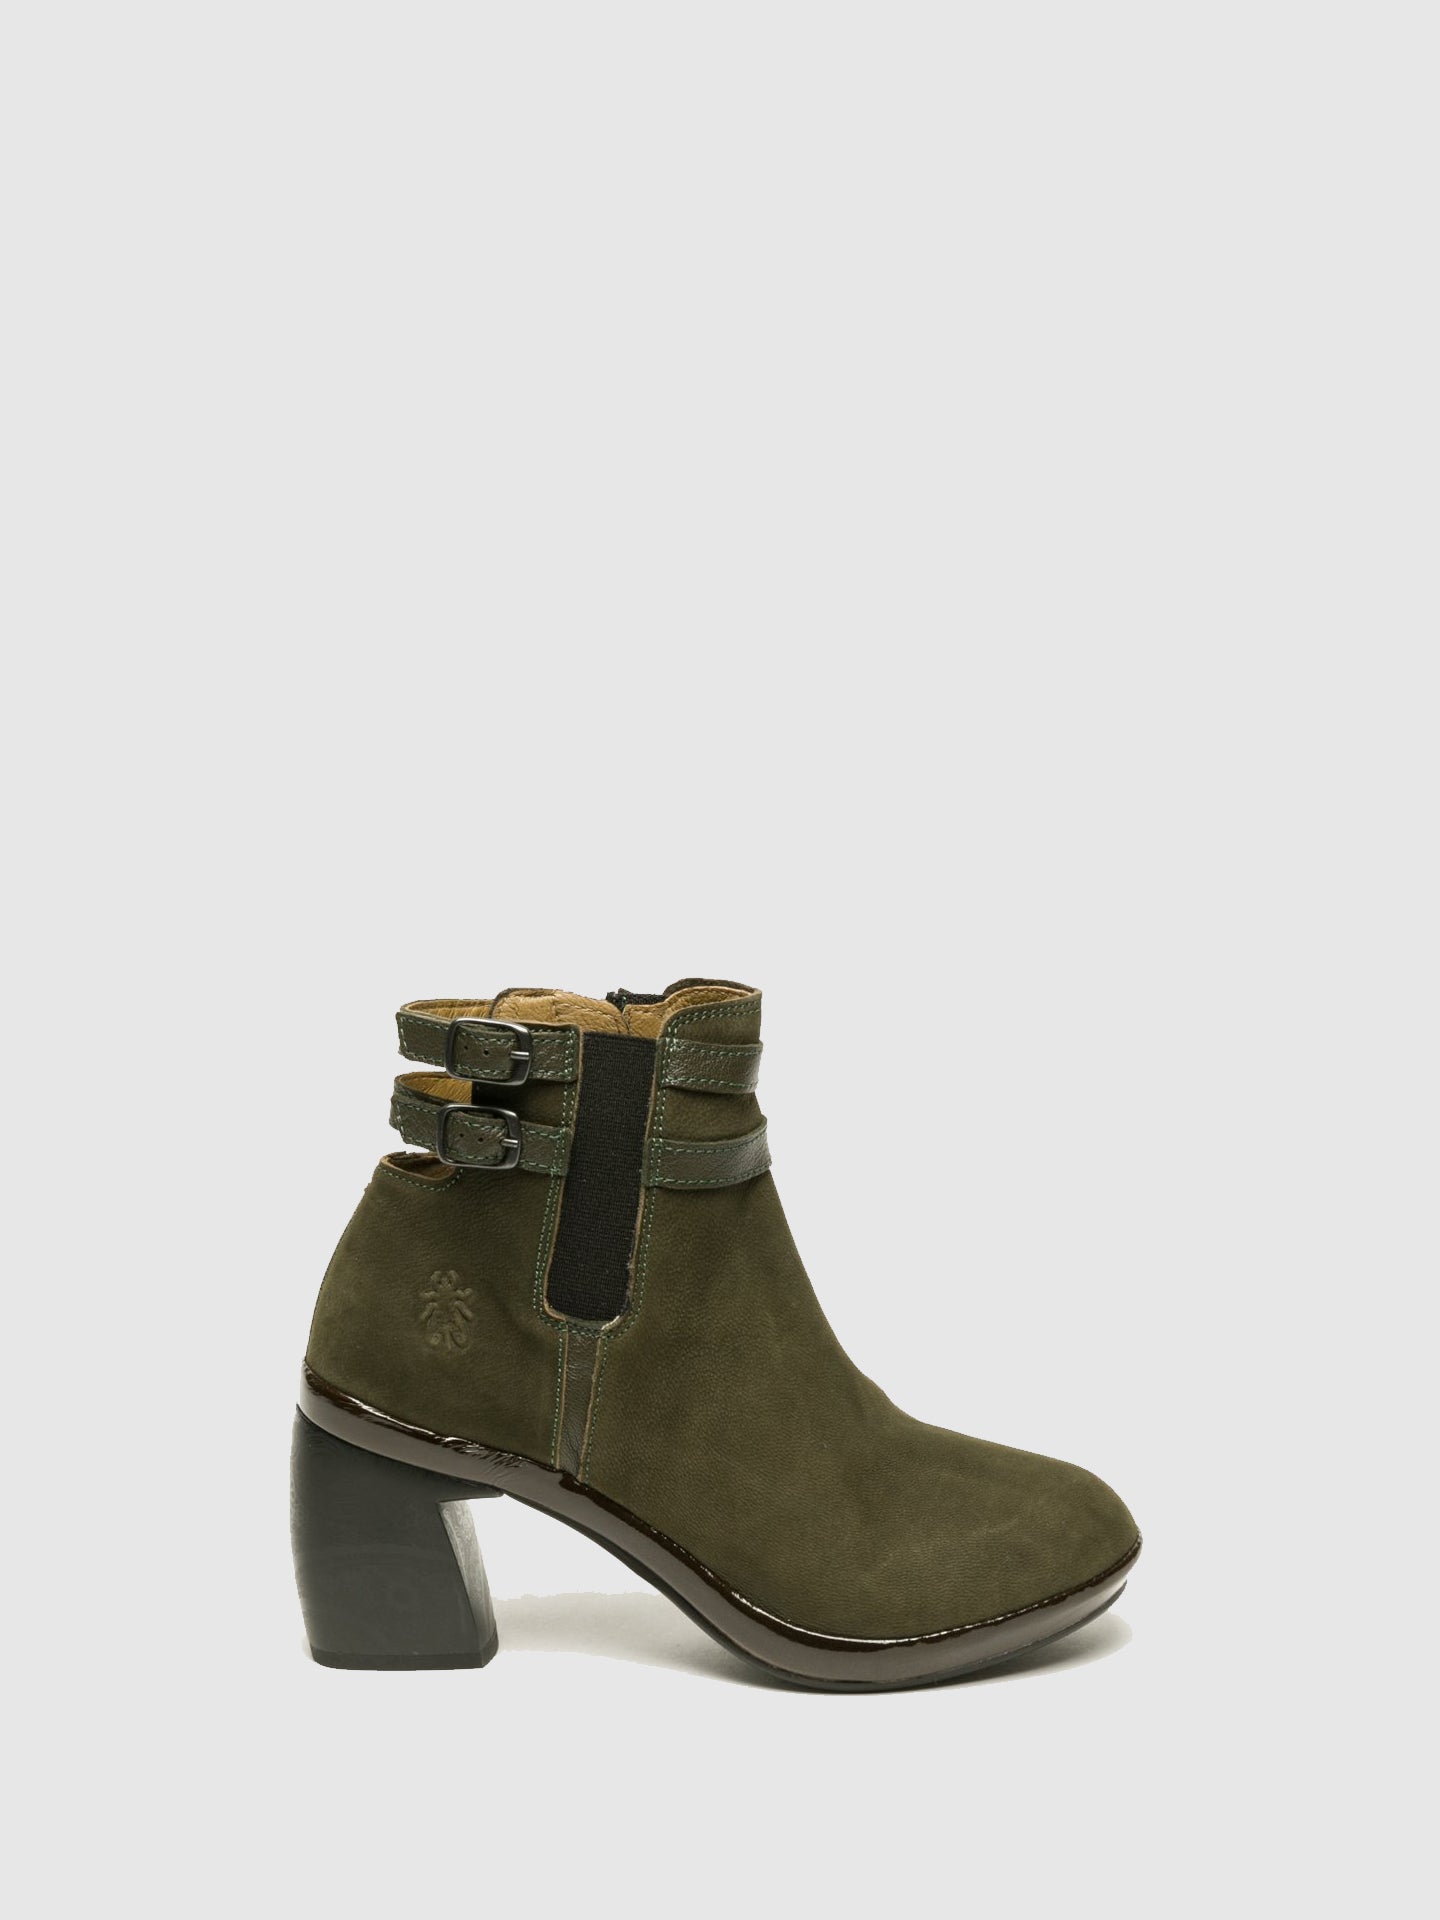 Fly London DarkGreen Buckle Ankle Boots